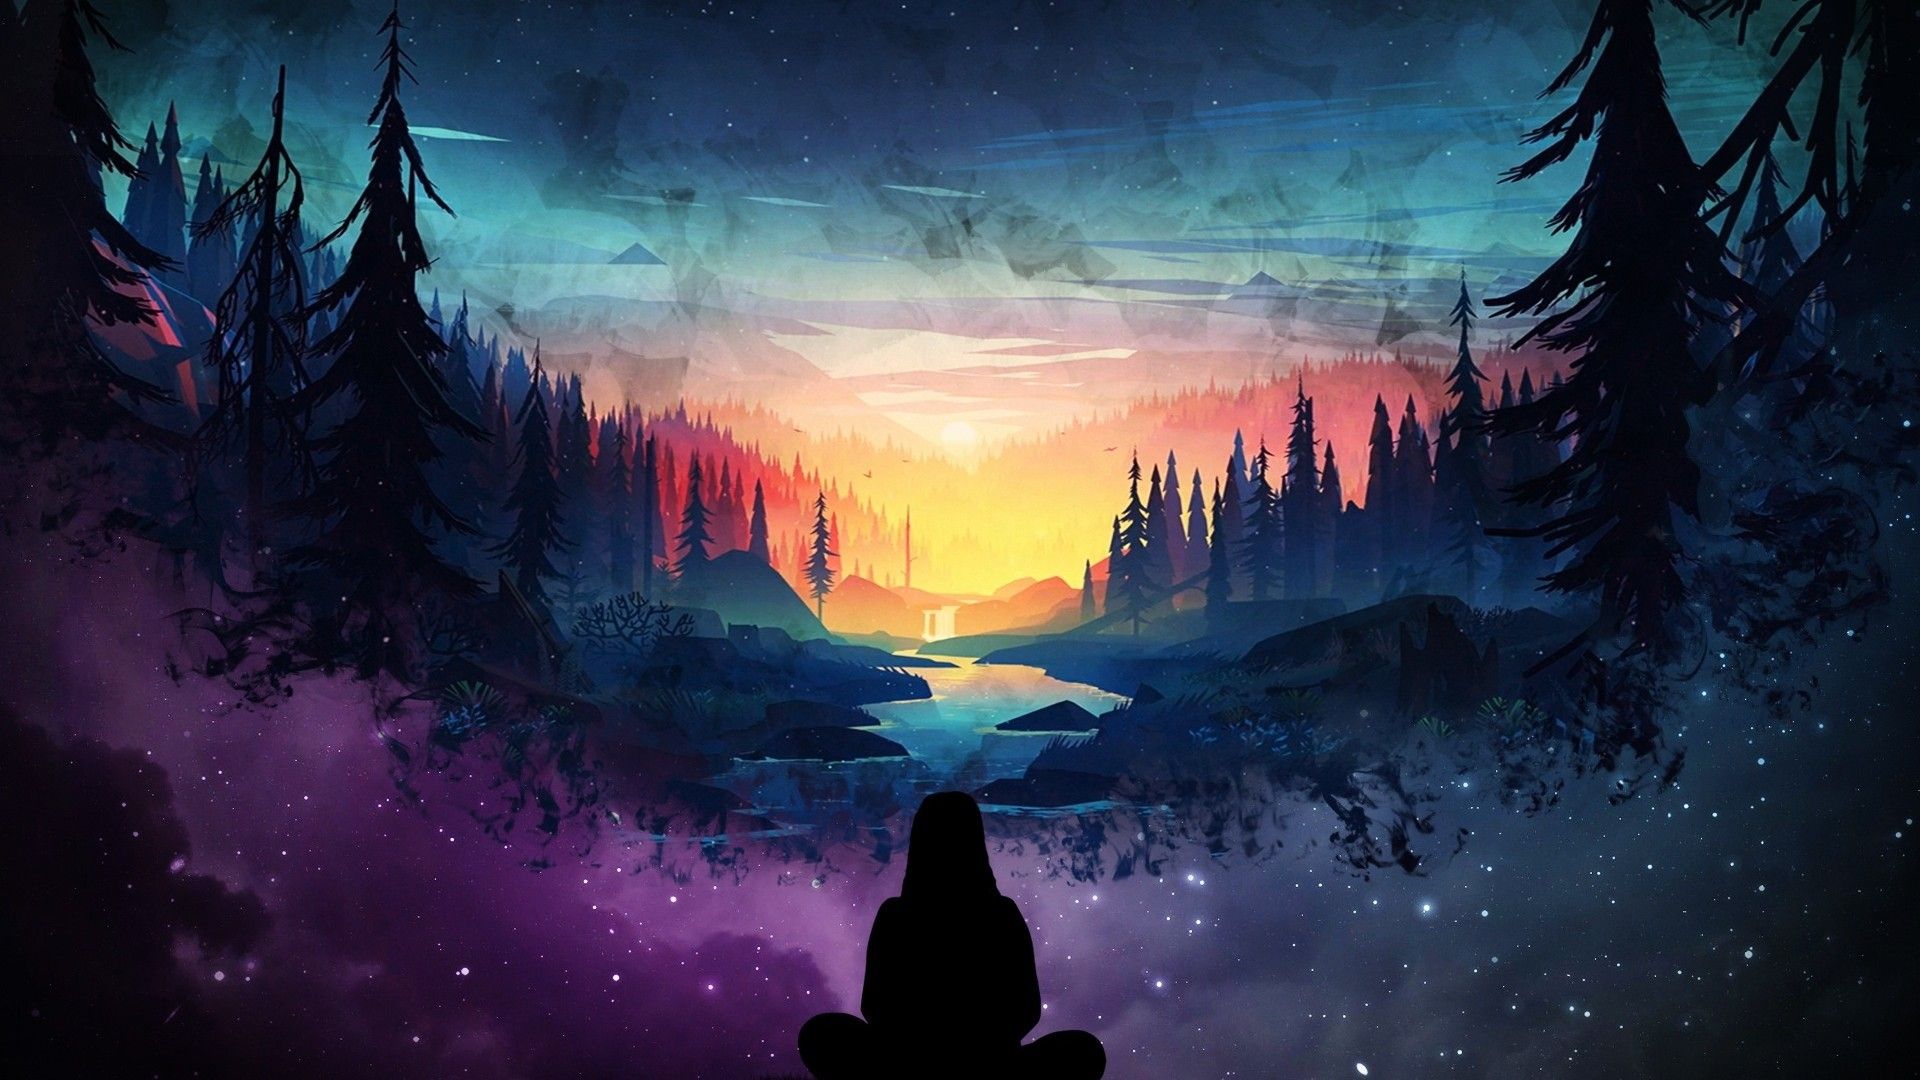 Download 1920x1080 River, Girl, Silhouette, Forest, Scenic, Stars, Two Dimensions, Digital Art Wallpaper for Widescreen